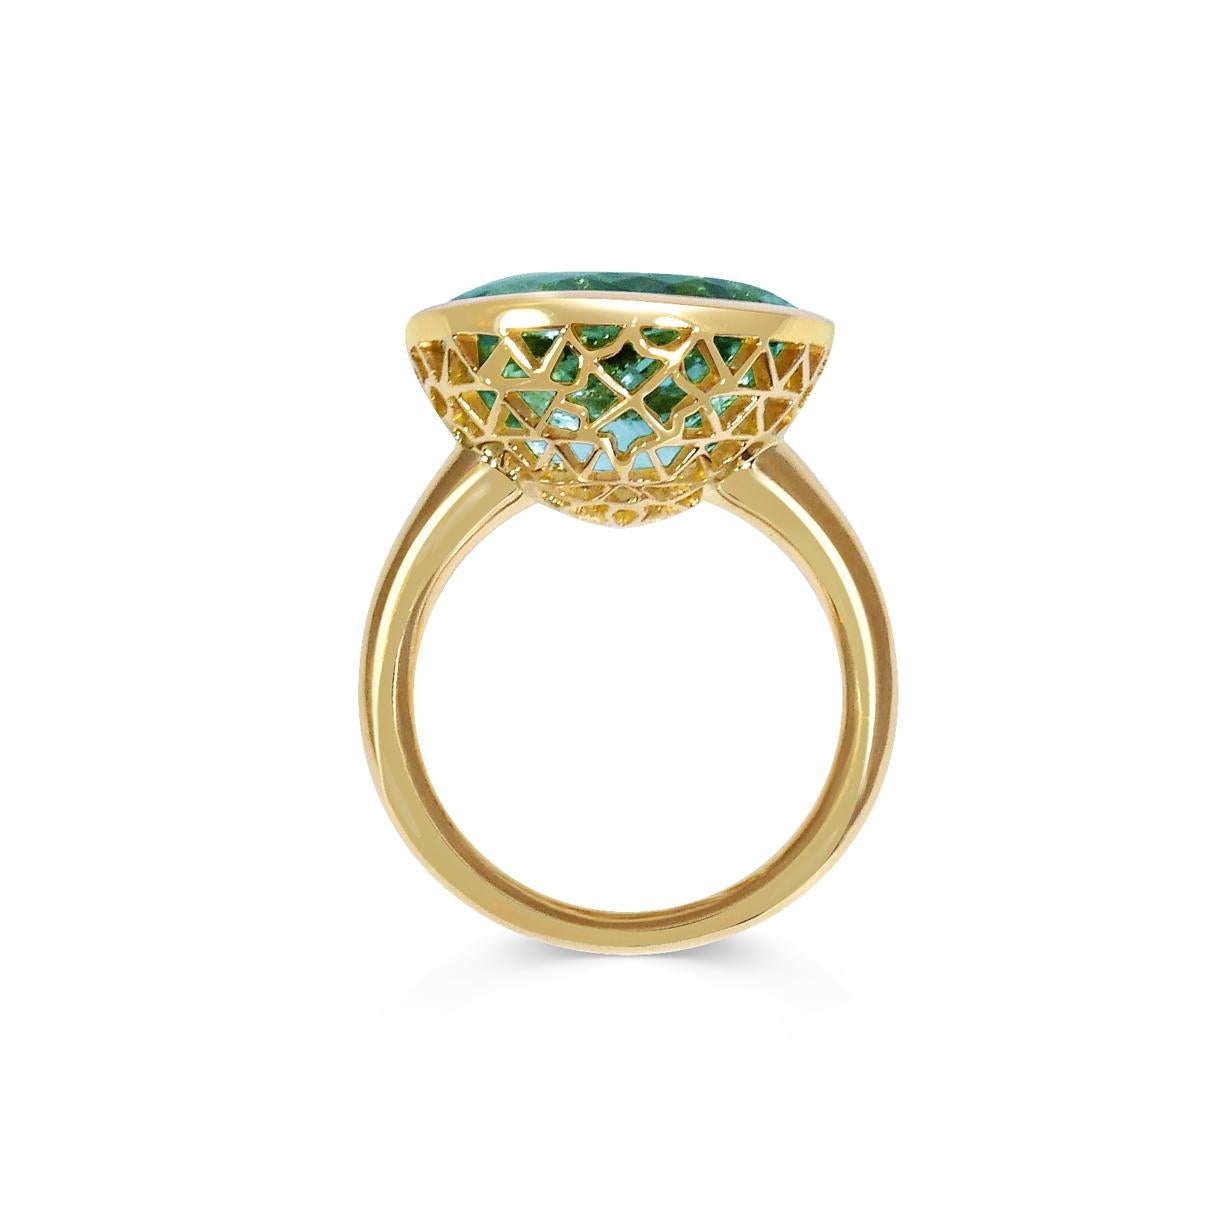 Handcrafted Oval Cut 9.17 Carats Aquamarine 18 Karat Yellow Gold Cocktail Ring. Our expert craftsmen hand pierce our iconic gold lace to fit each stone on a tapered band making each ring One of a Kind. This unique technique, inspired by our